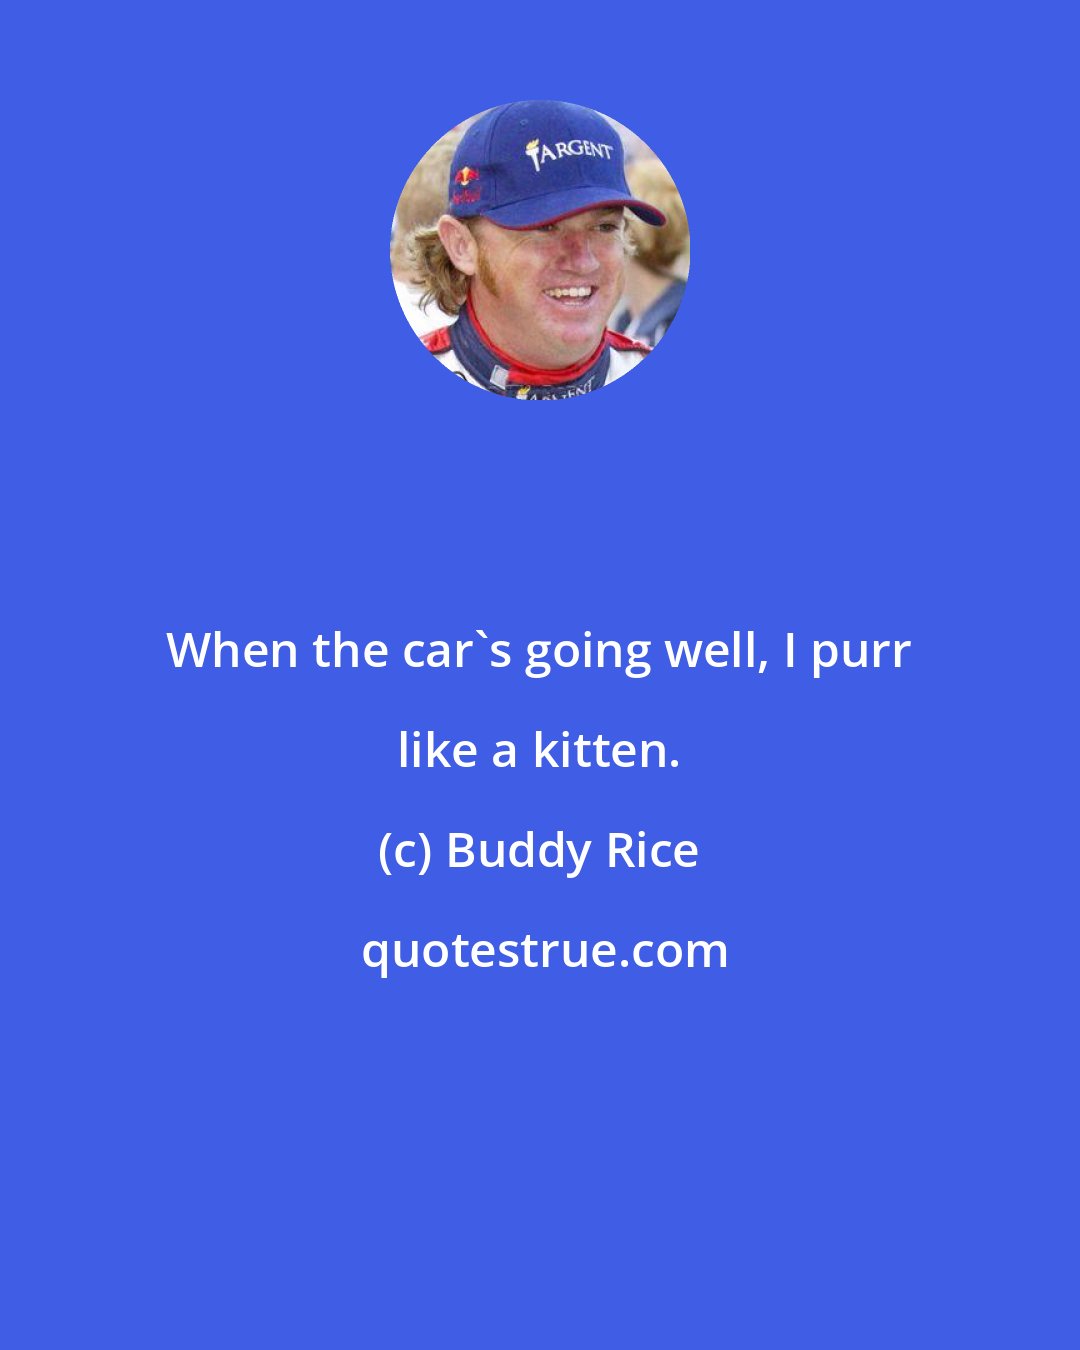 Buddy Rice: When the car's going well, I purr like a kitten.